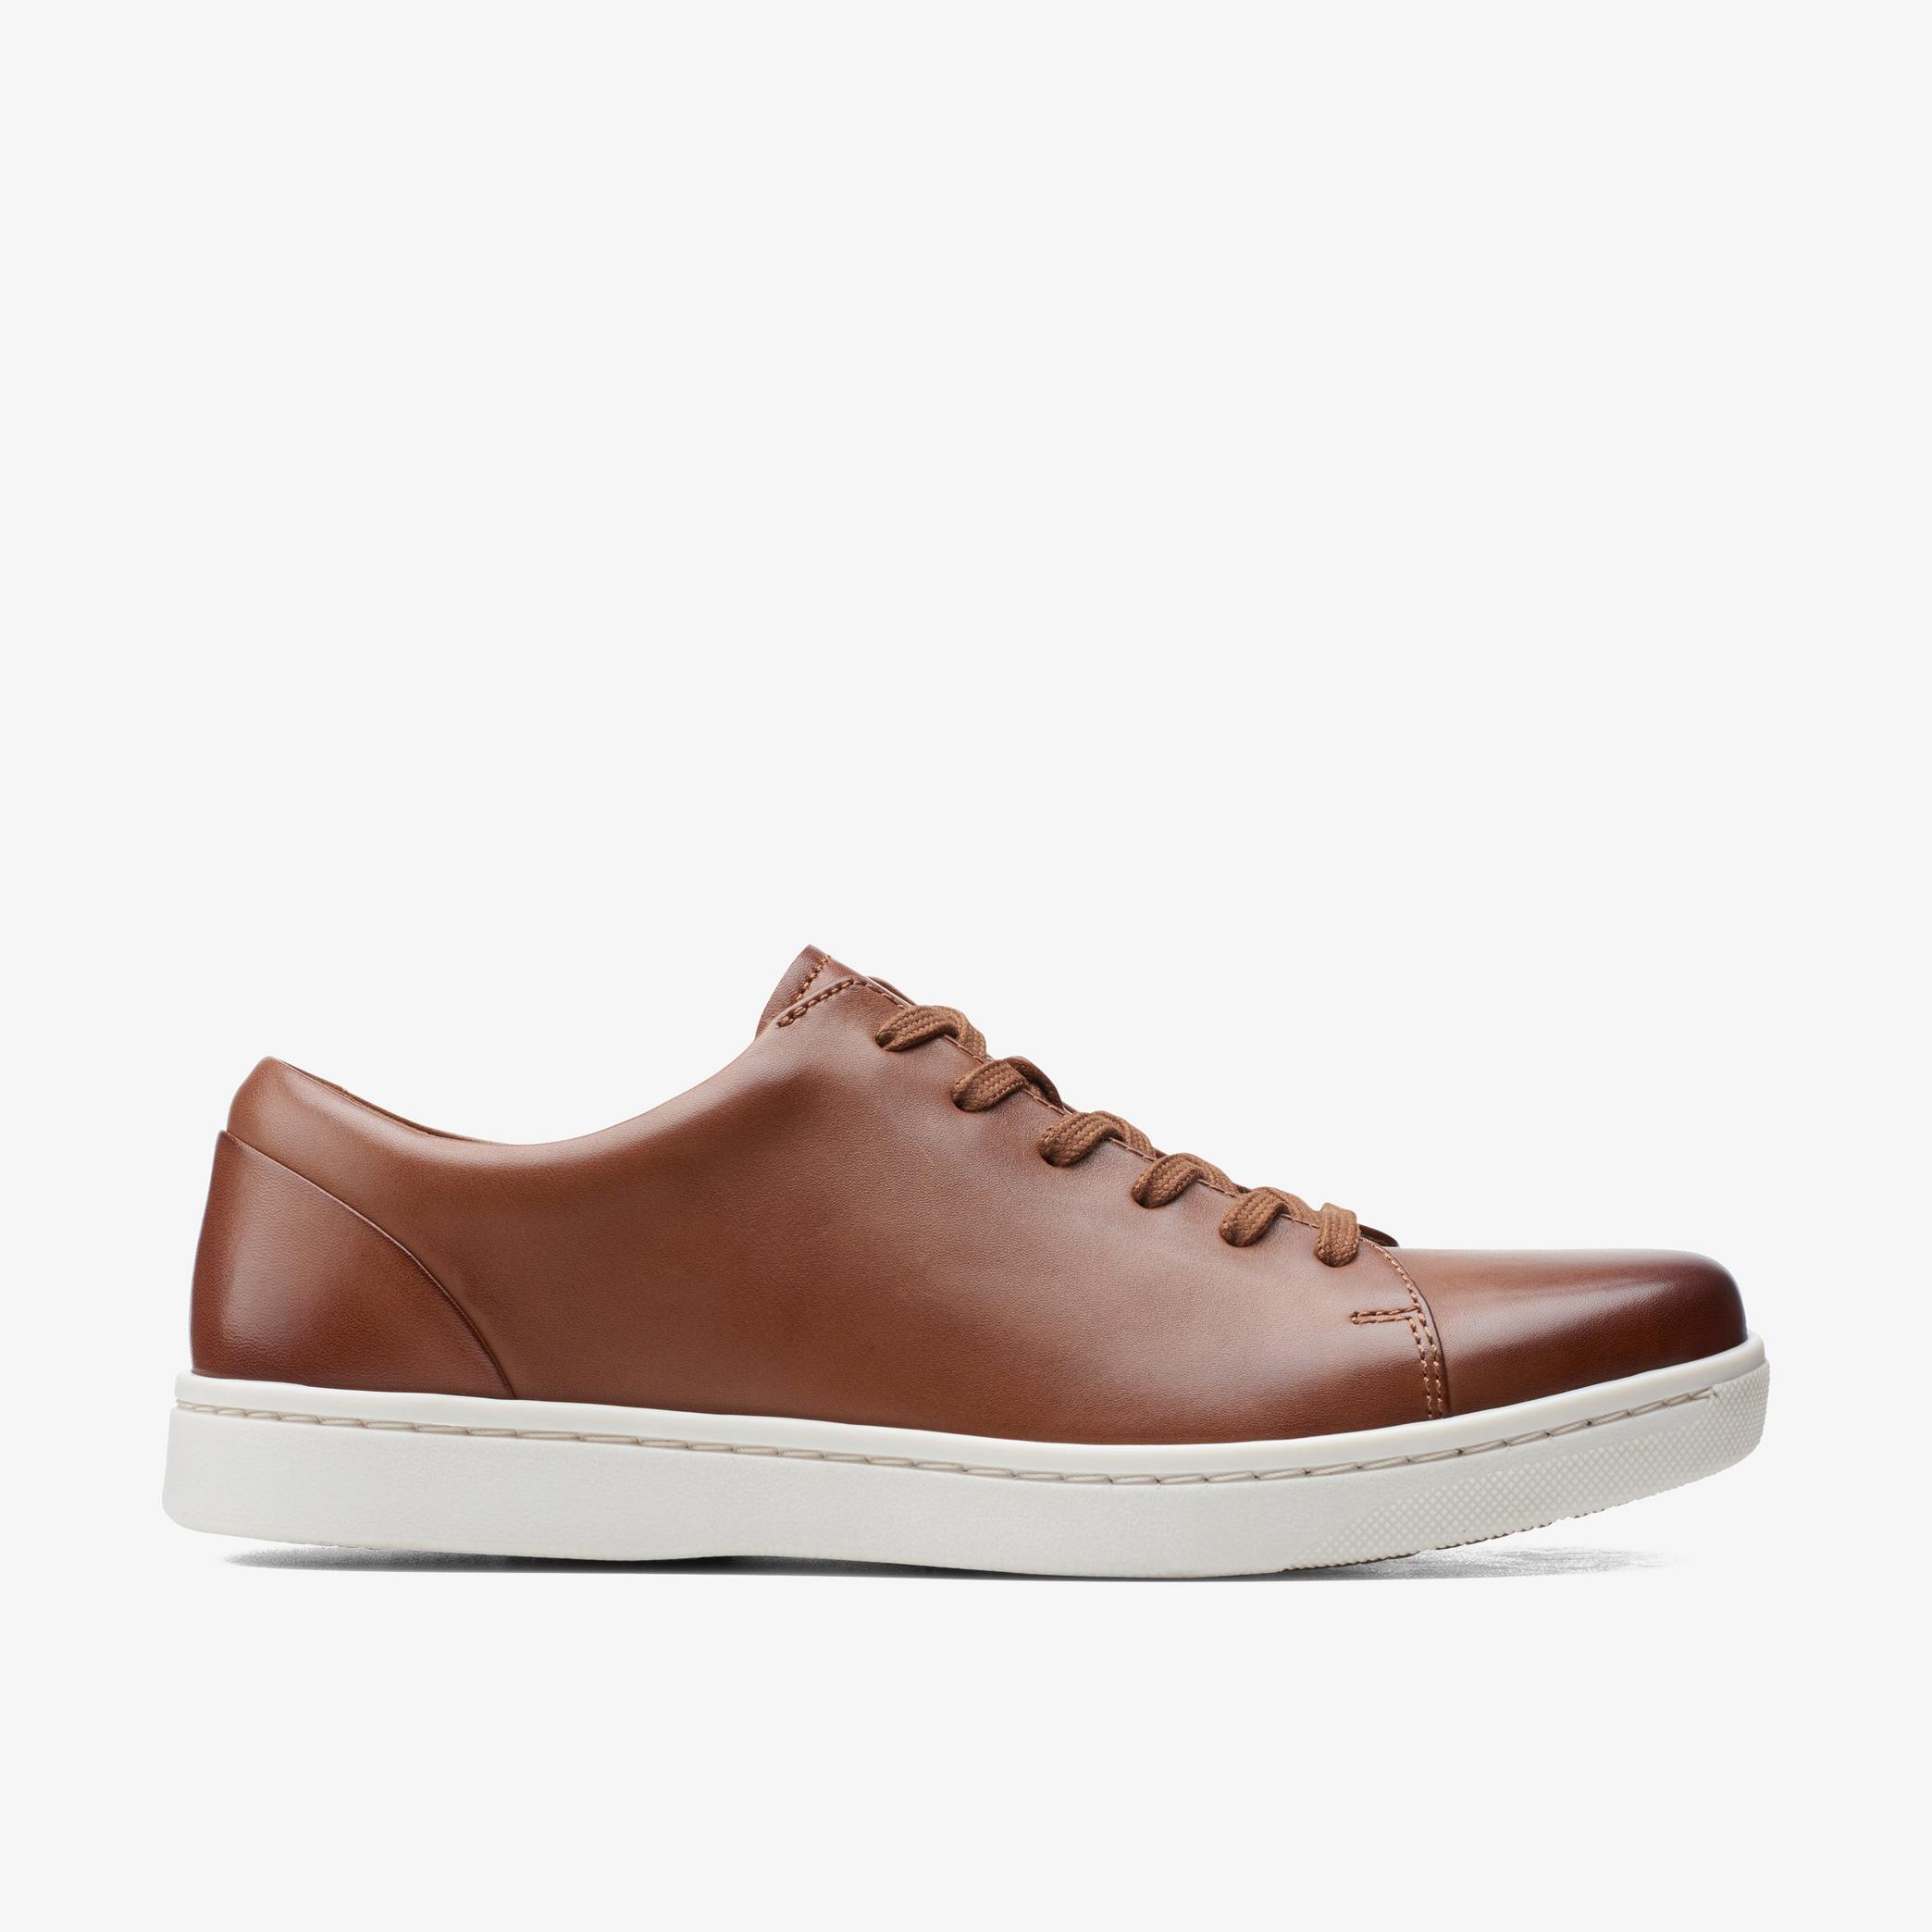 Kitna Lo Dark Tan Leather Shoes, view 1 of 6